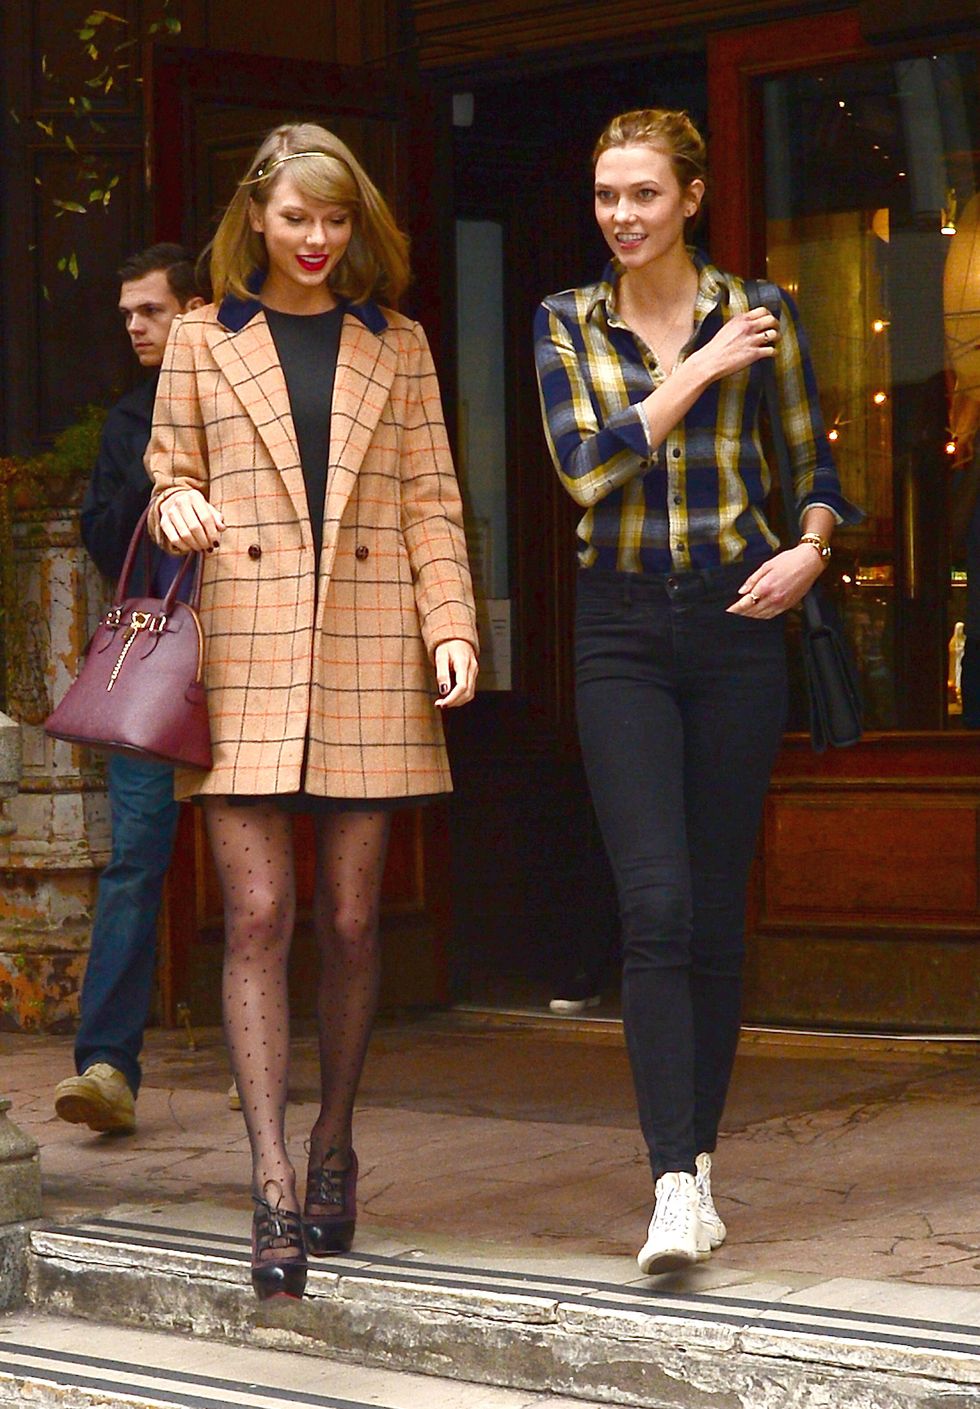 Taylor Swift and Karlie Kloss wearing matching check while out in New York